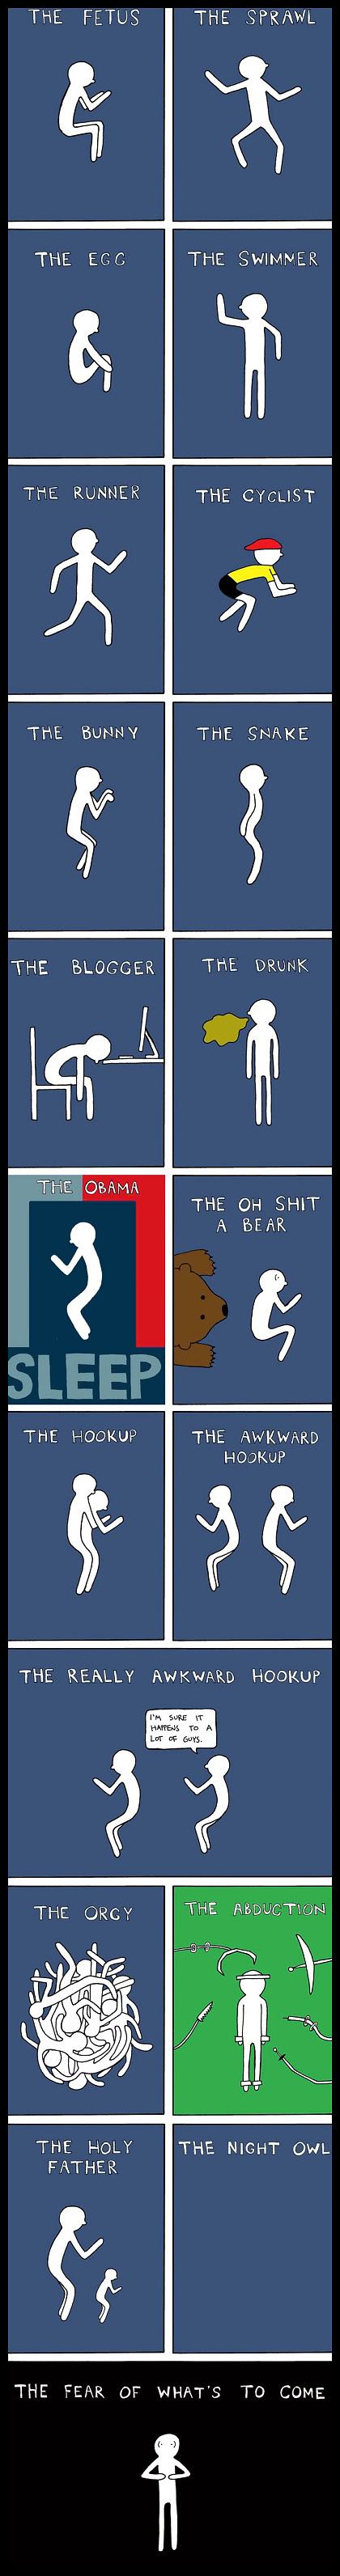 Obrázek - The illustrated guide to sleeping positions -      29.04.2013